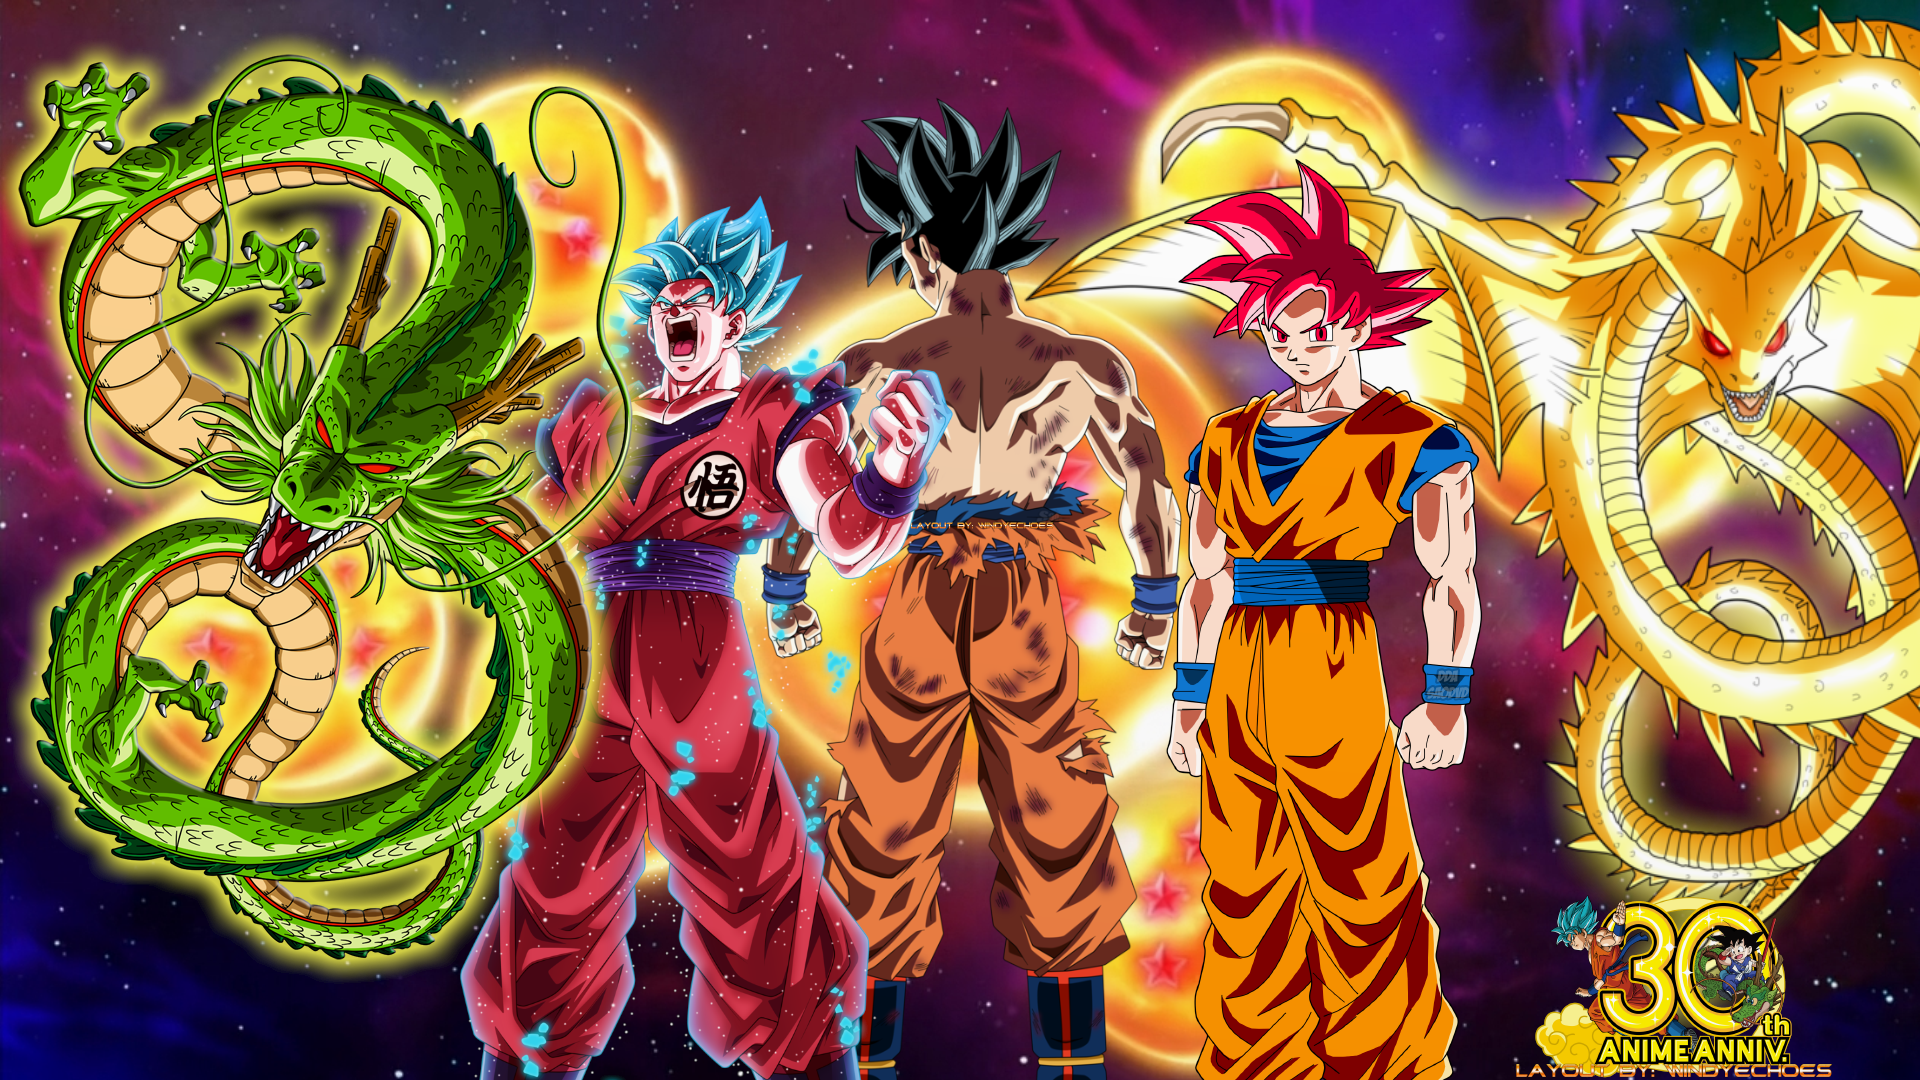 Goku's long hair in his god form - wide 1